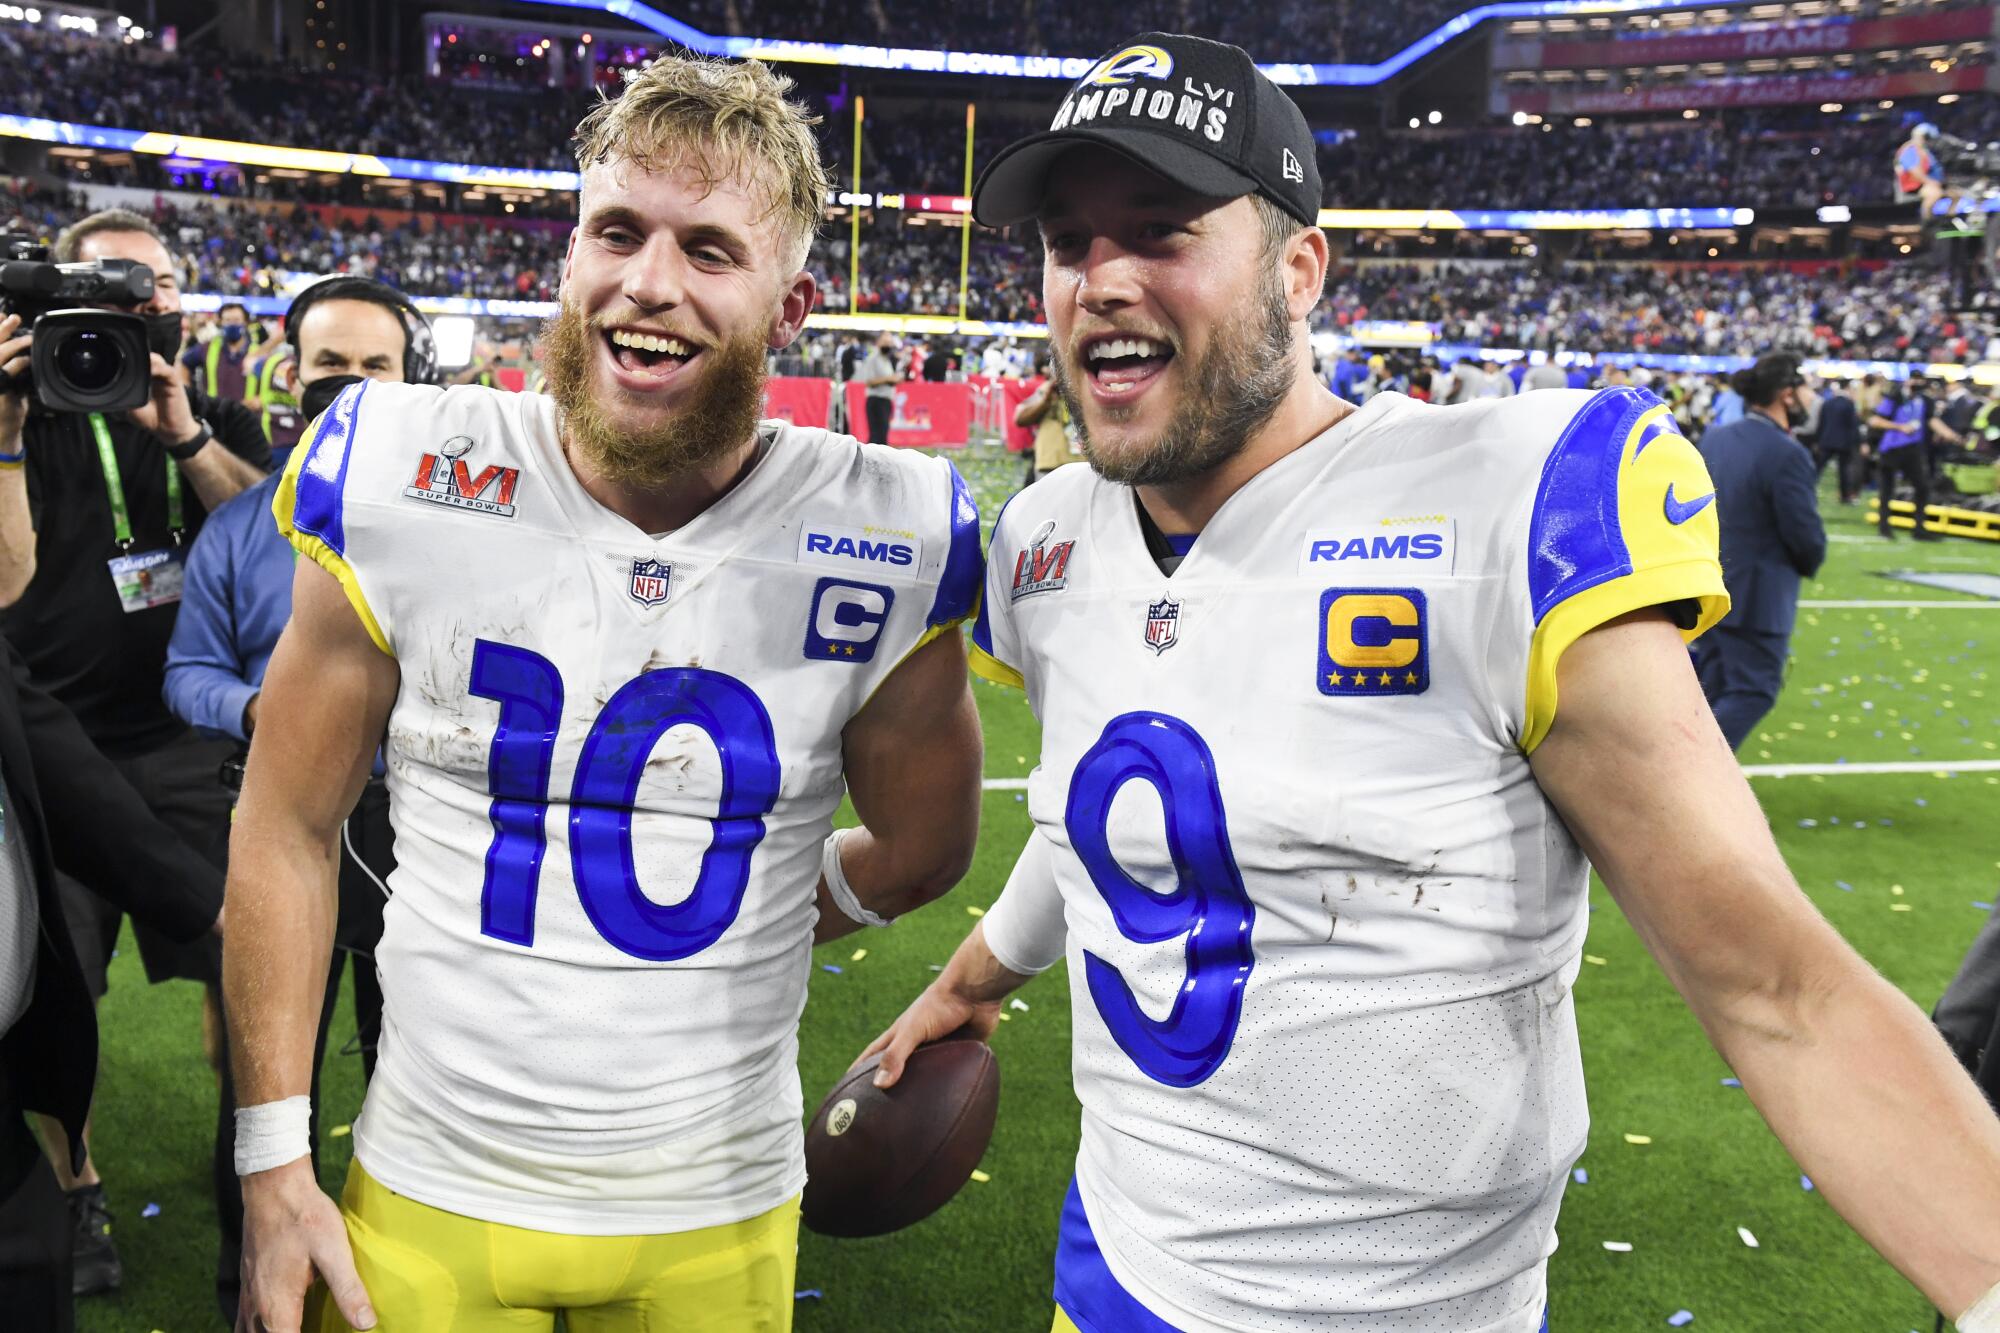 Rams wide receiver Cooper Kupp (left) and quarterback Matthew Stafford pose for a photo on the field.